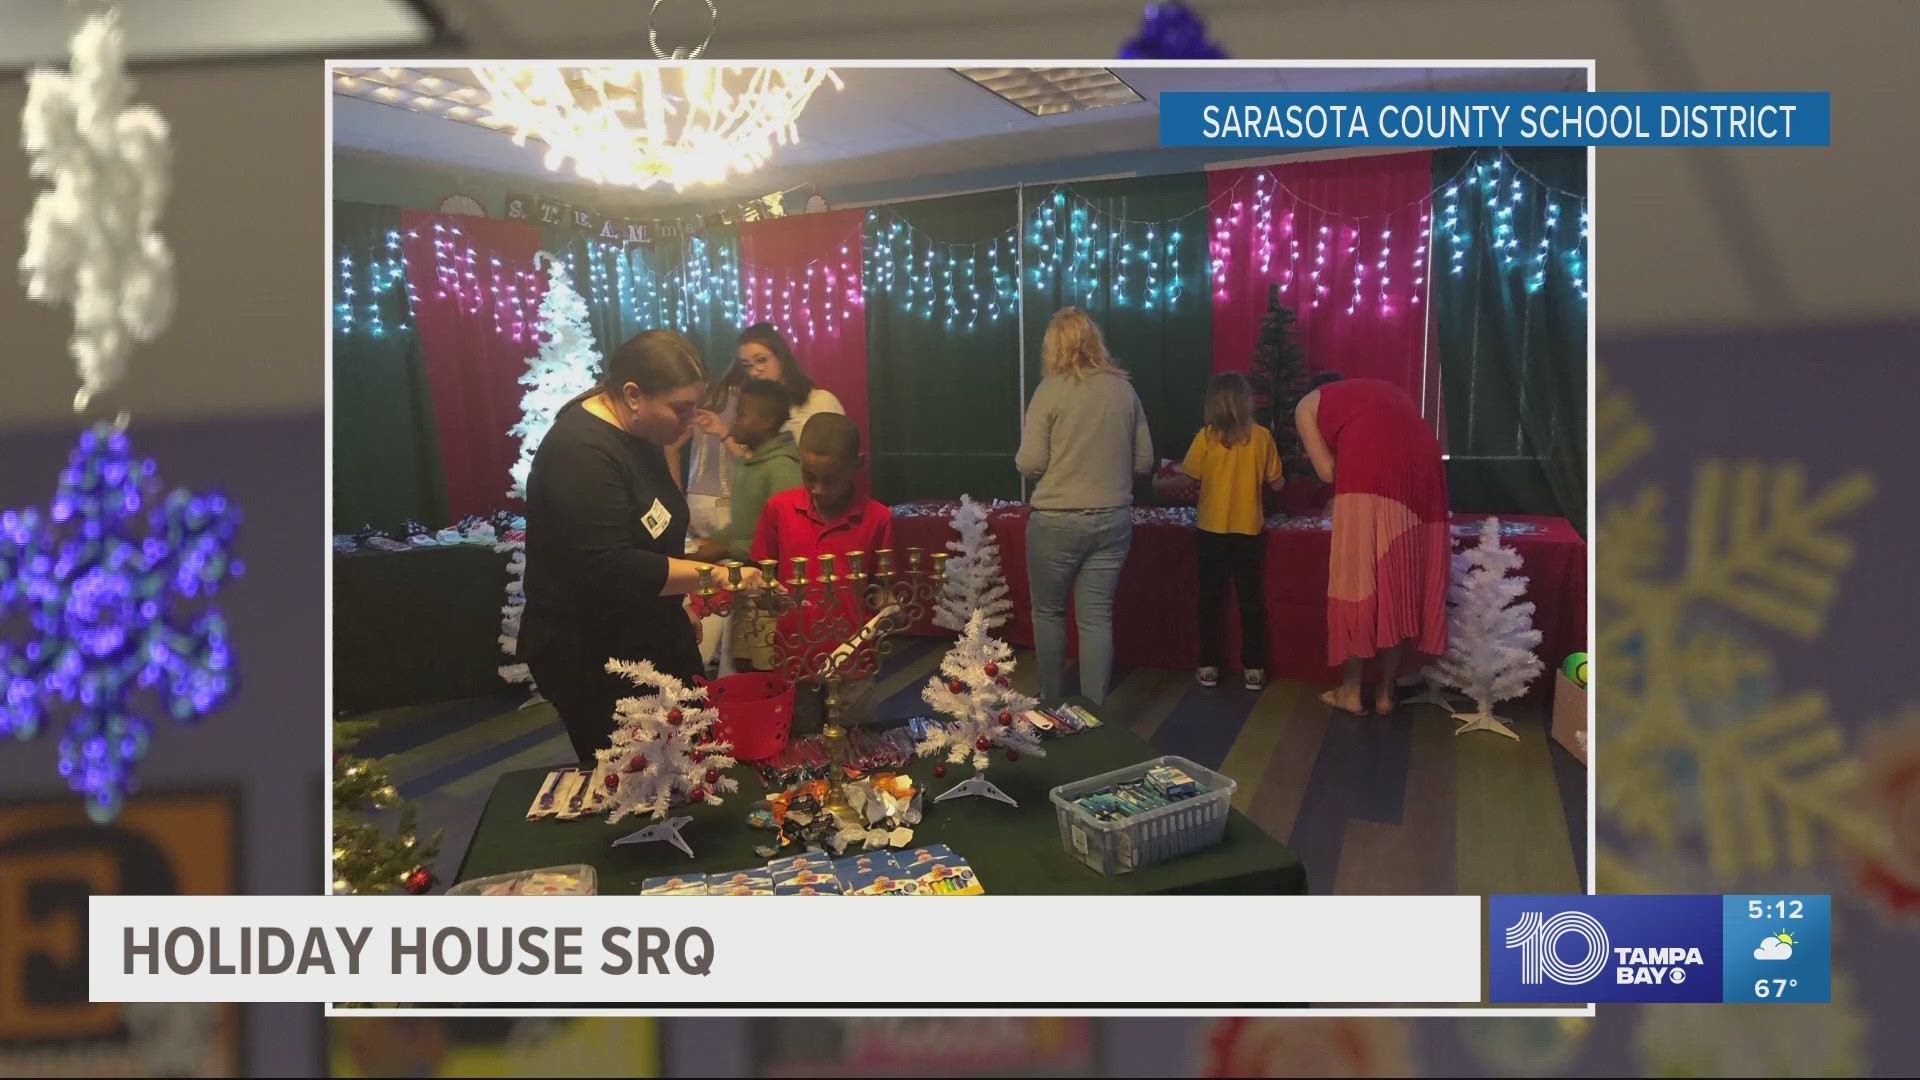 Organizers of Holiday House SRQ are accepting donations all year round to help expand the program to other schools each year.